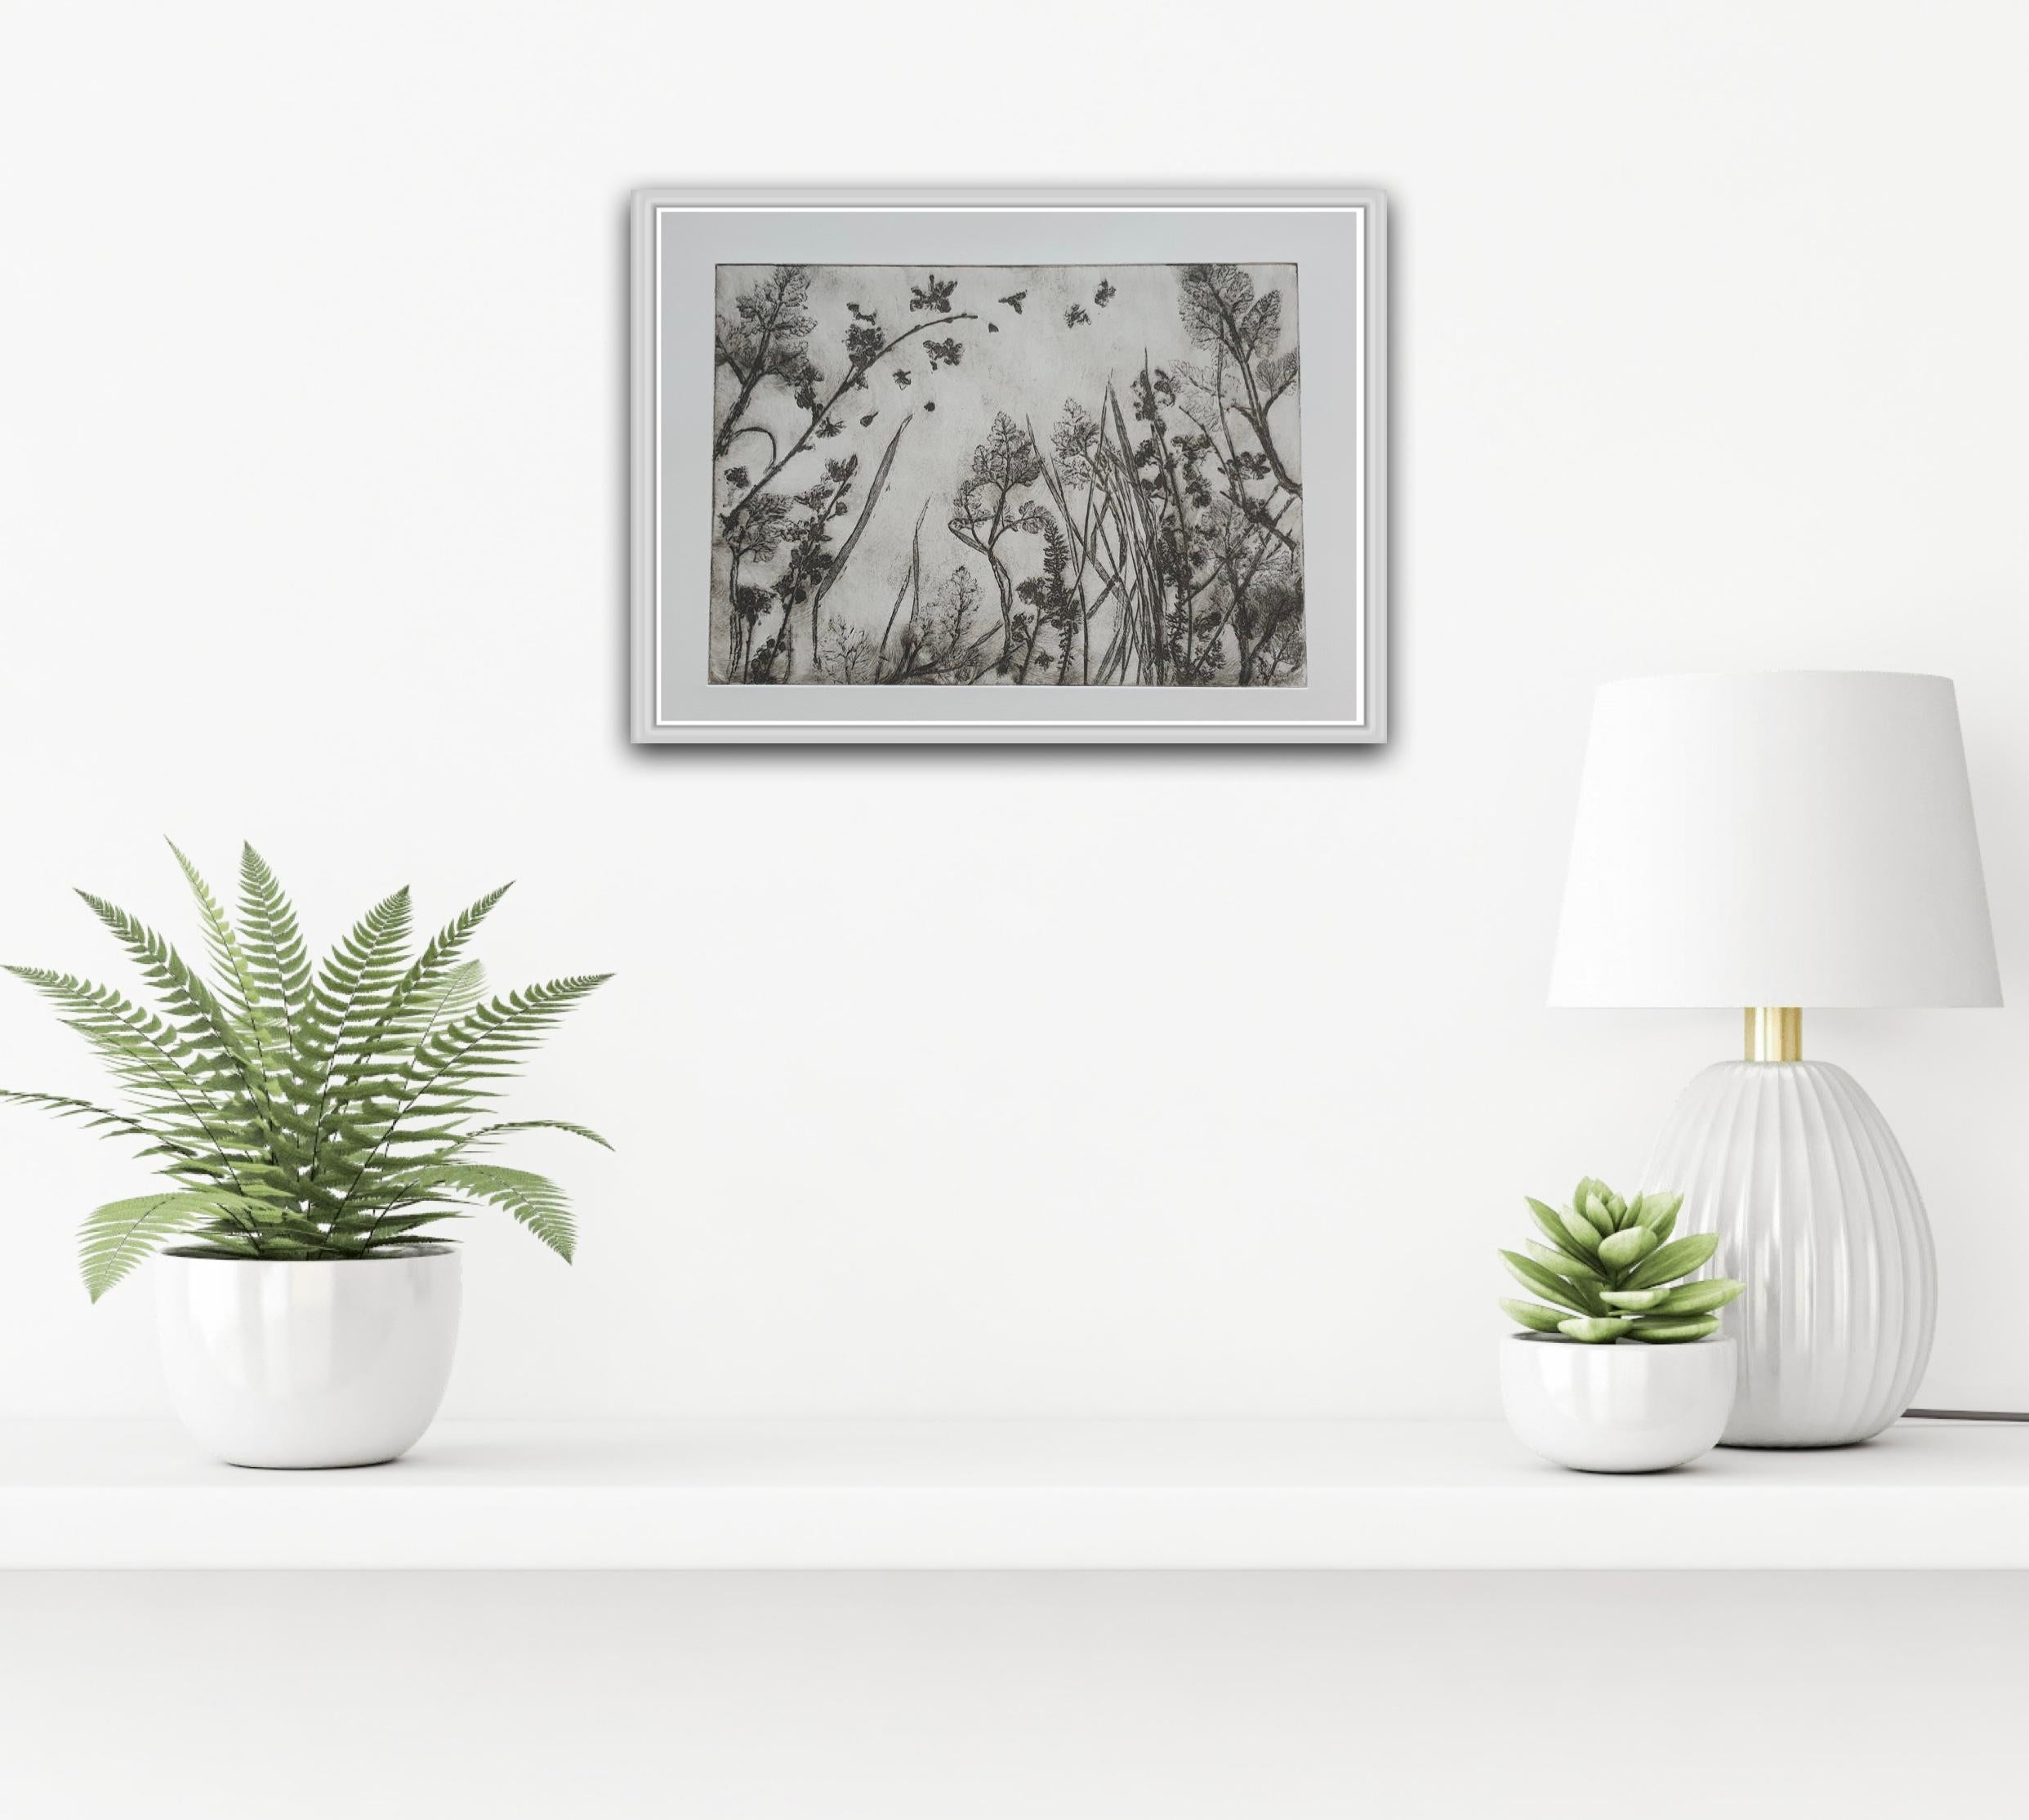 Caught on a Breeze #2 – Sepia - Contemporary Print by Charlie Davies